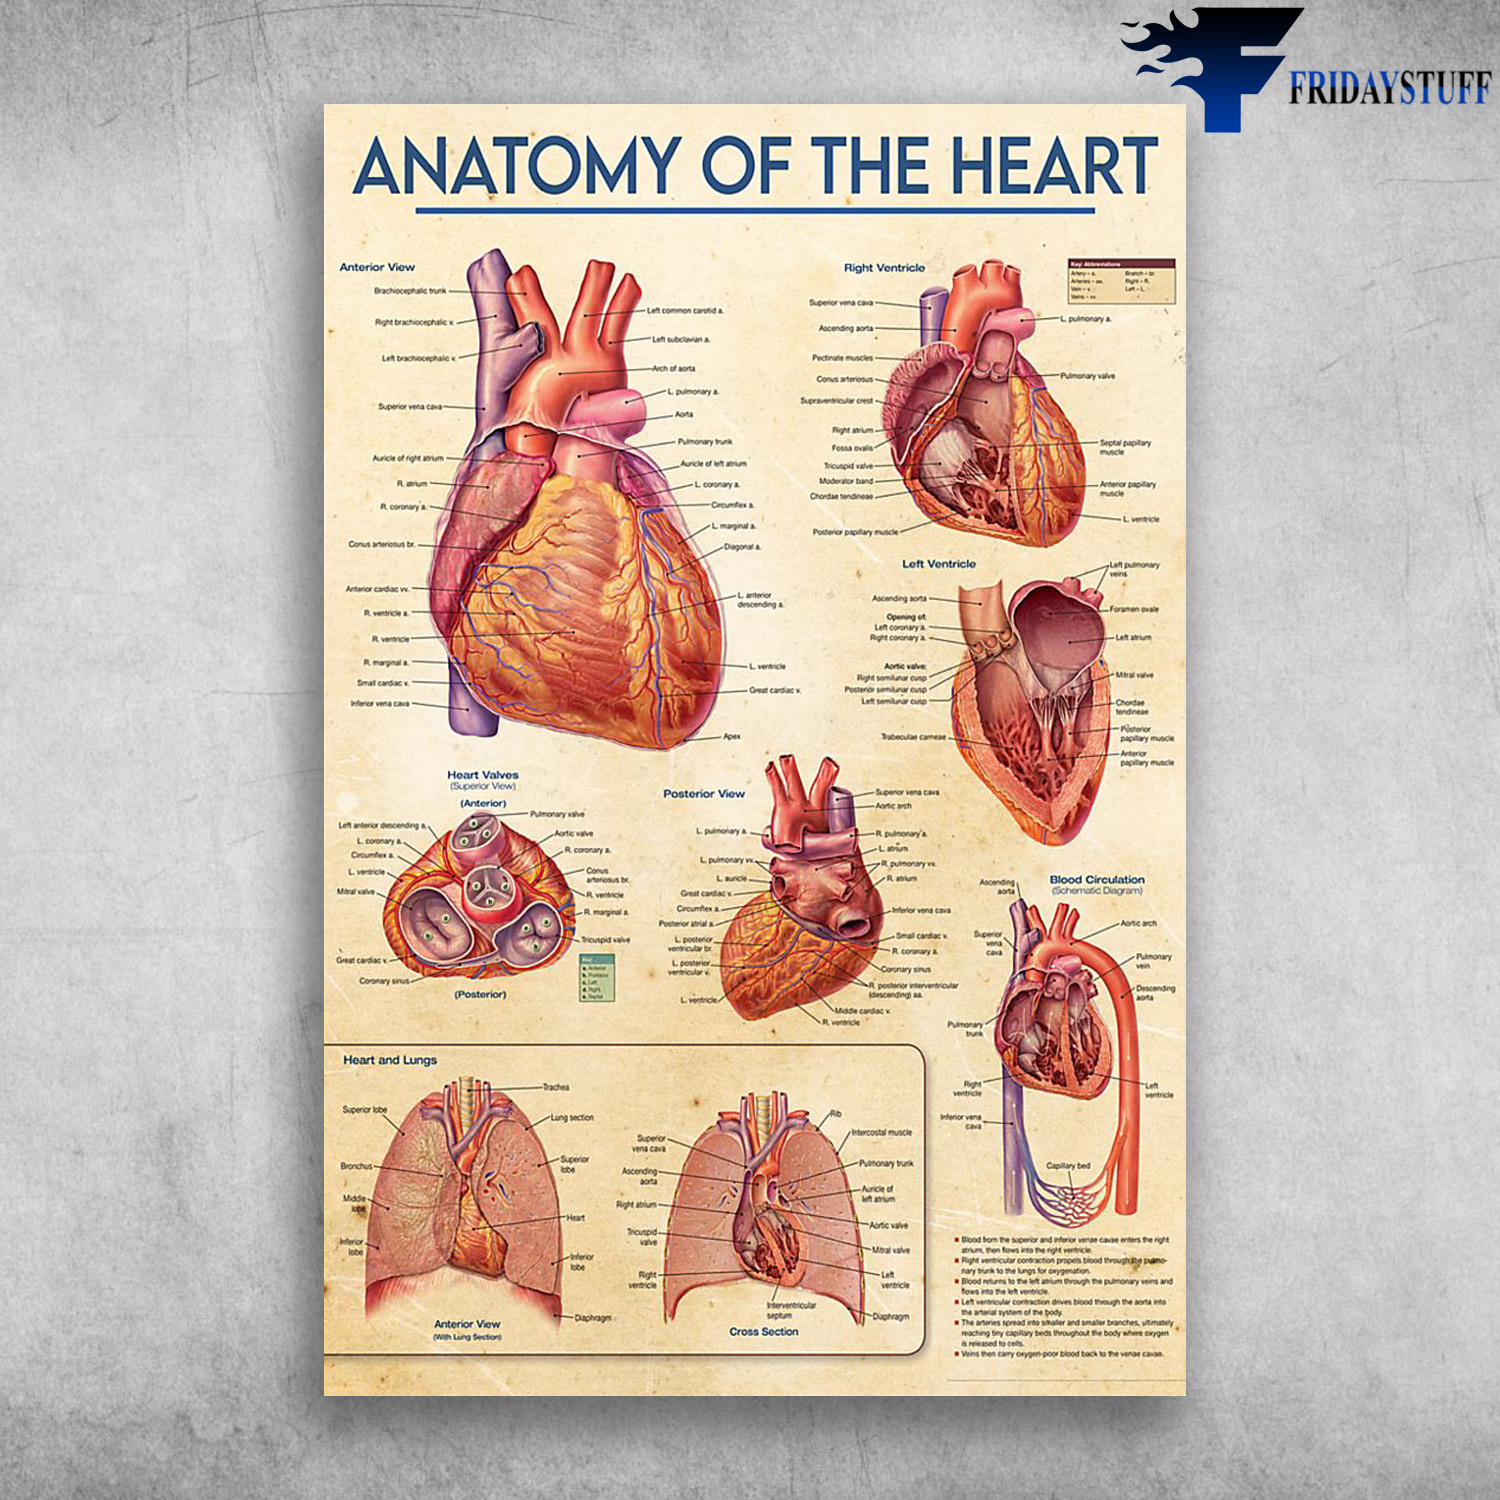 Heart Anatomy - Anatomy Of The Heart, Anterior View, Right Ventricle, Heart Valves, Posterior View